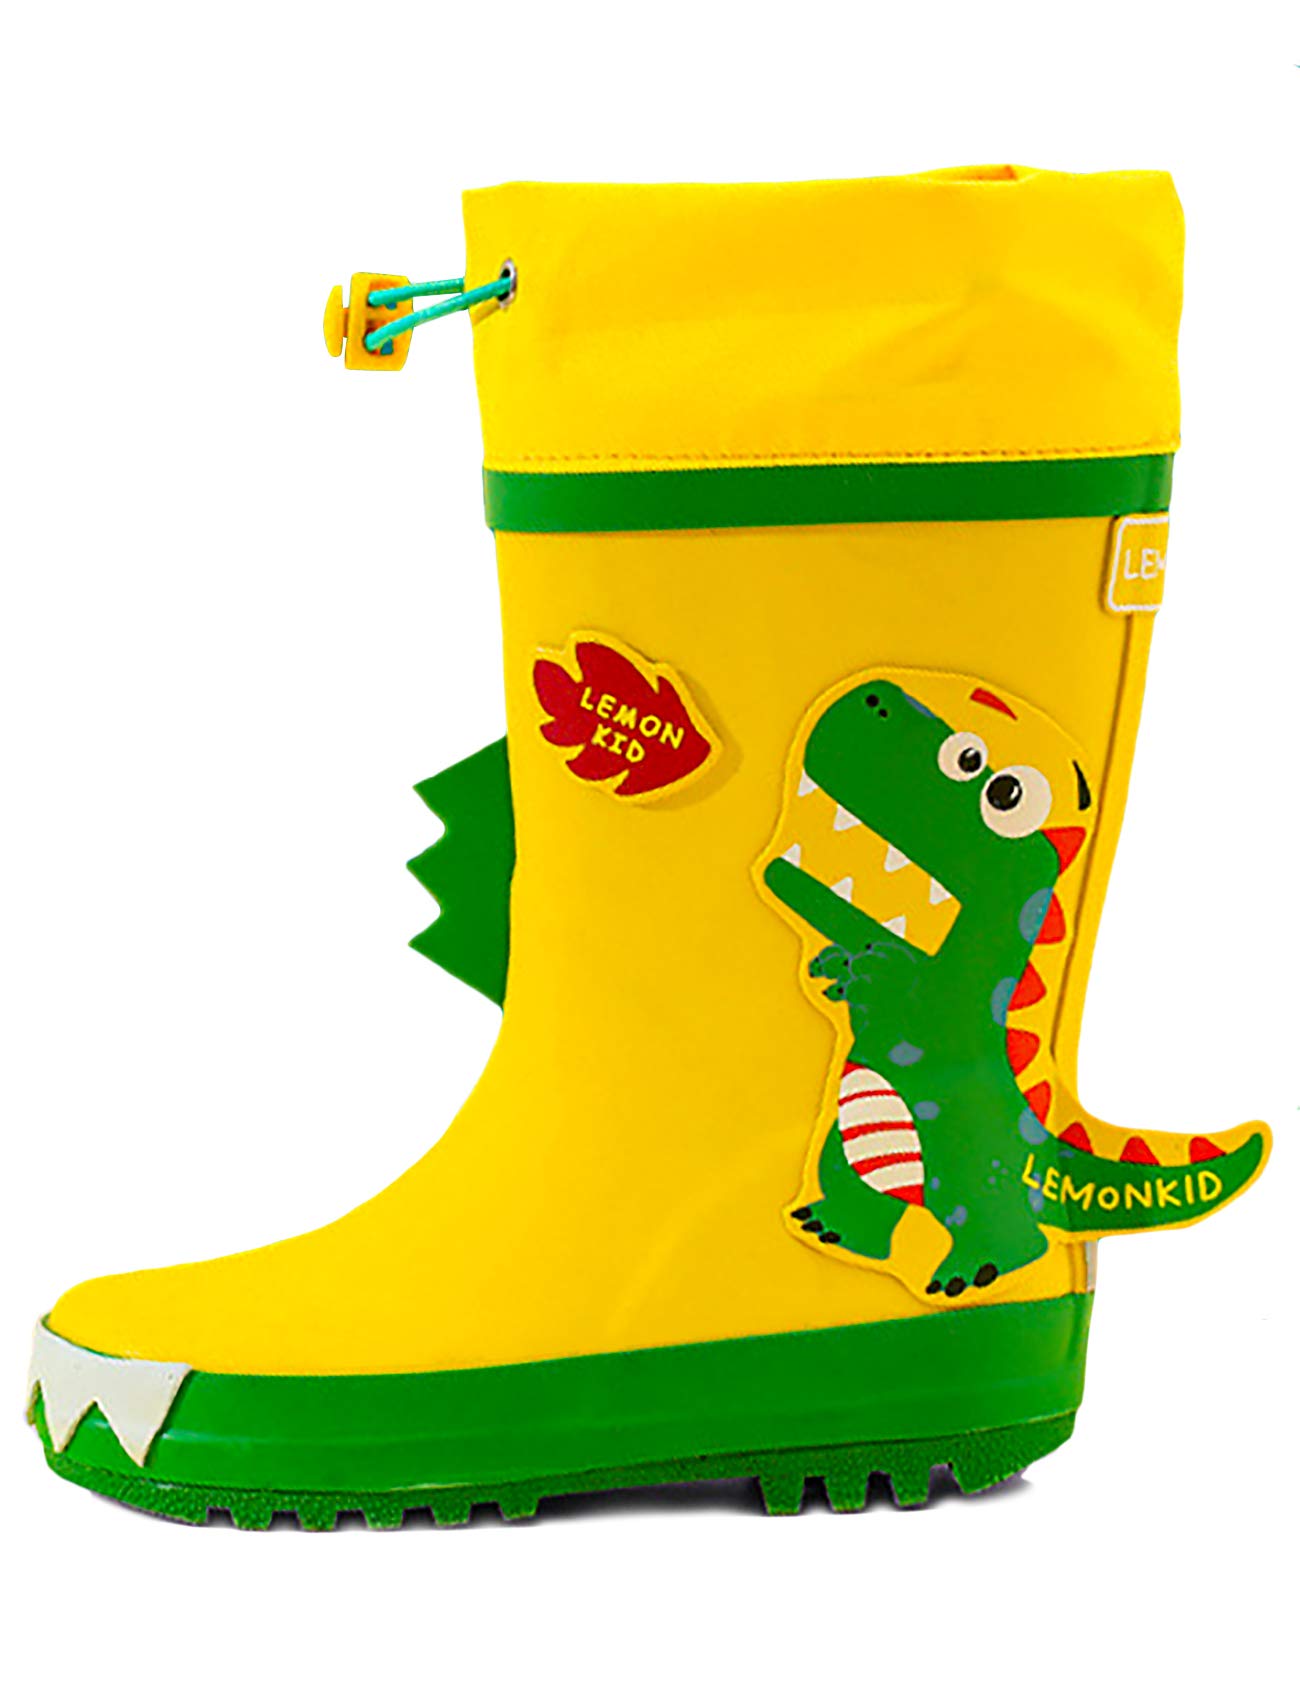 AONTUS Dinosaur Rain Boots for Kids,Printed All Weather Boots,100% Rubber Boots,Toddler